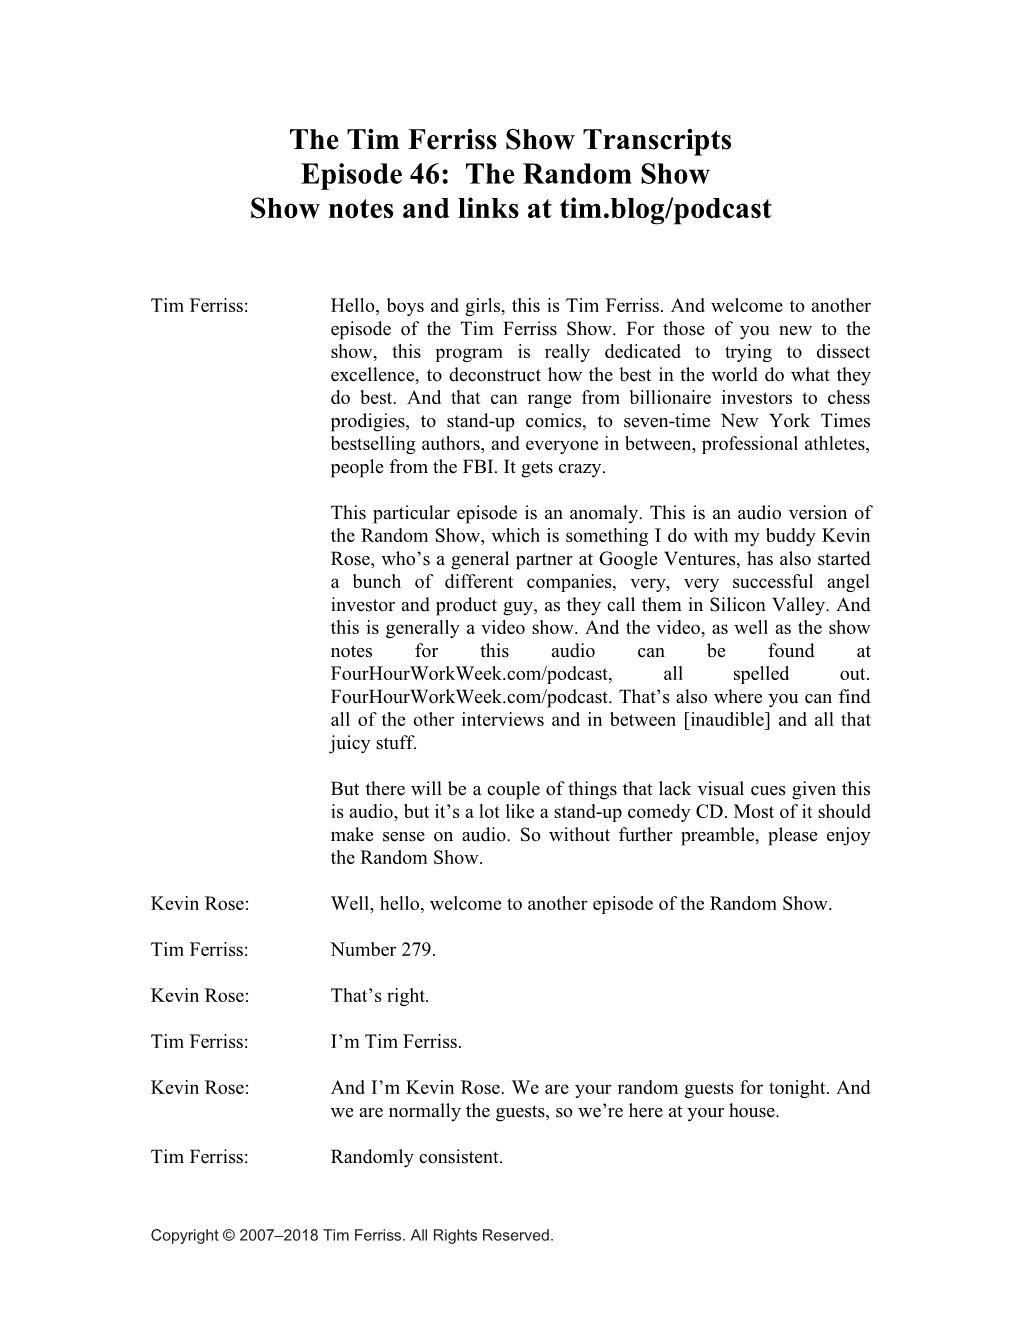 The Tim Ferriss Show Transcripts Episode 46: the Random Show Show Notes and Links at Tim.Blog/Podcast